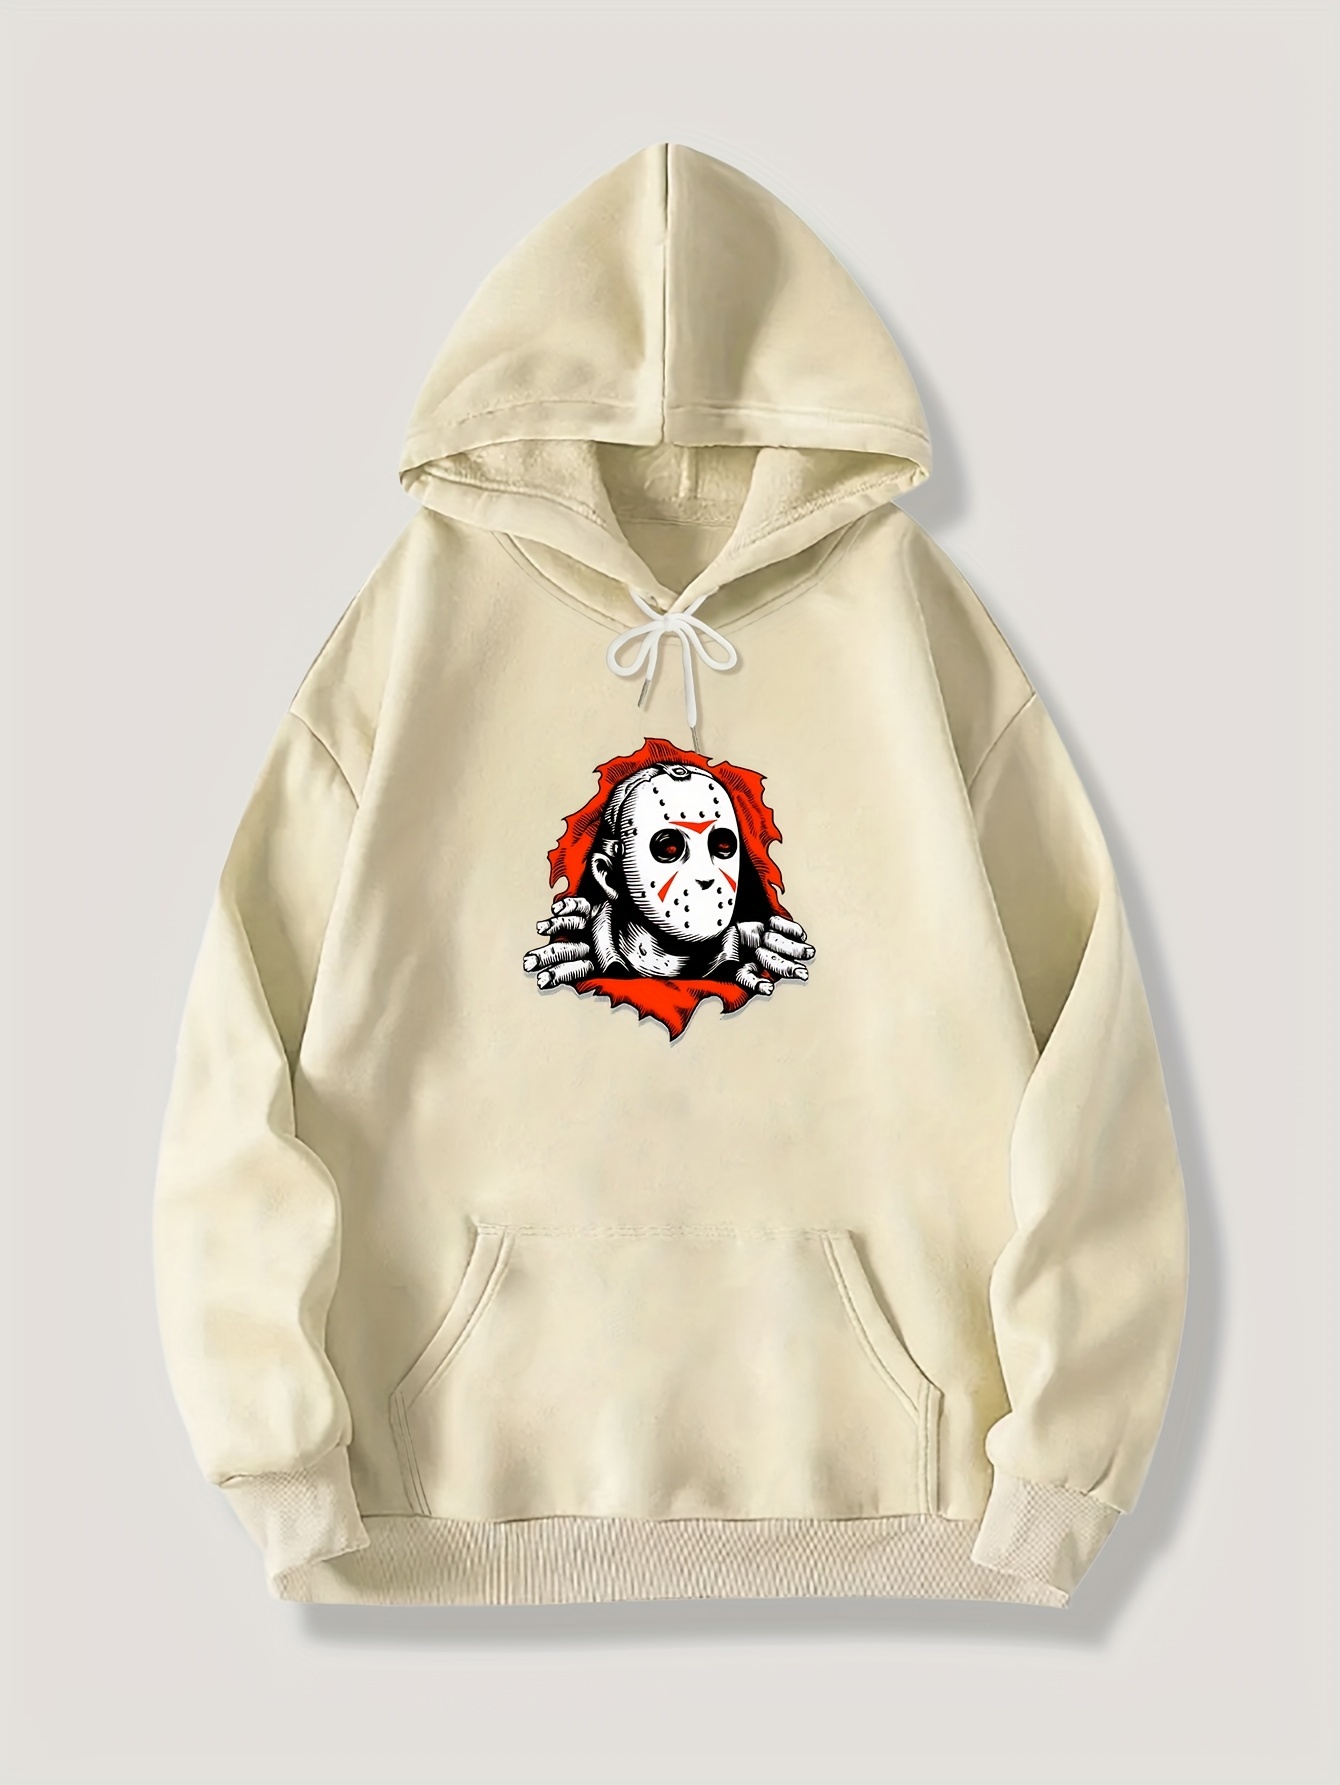 Horror Skull Print Hoodie Cool Hoodies For Men Mens Casual Graphic Design  Pullover Hooded Sweatshirt With Kangaroo Pocket Streetwear For Winter Fall  As Gifts, High-quality & Affordable